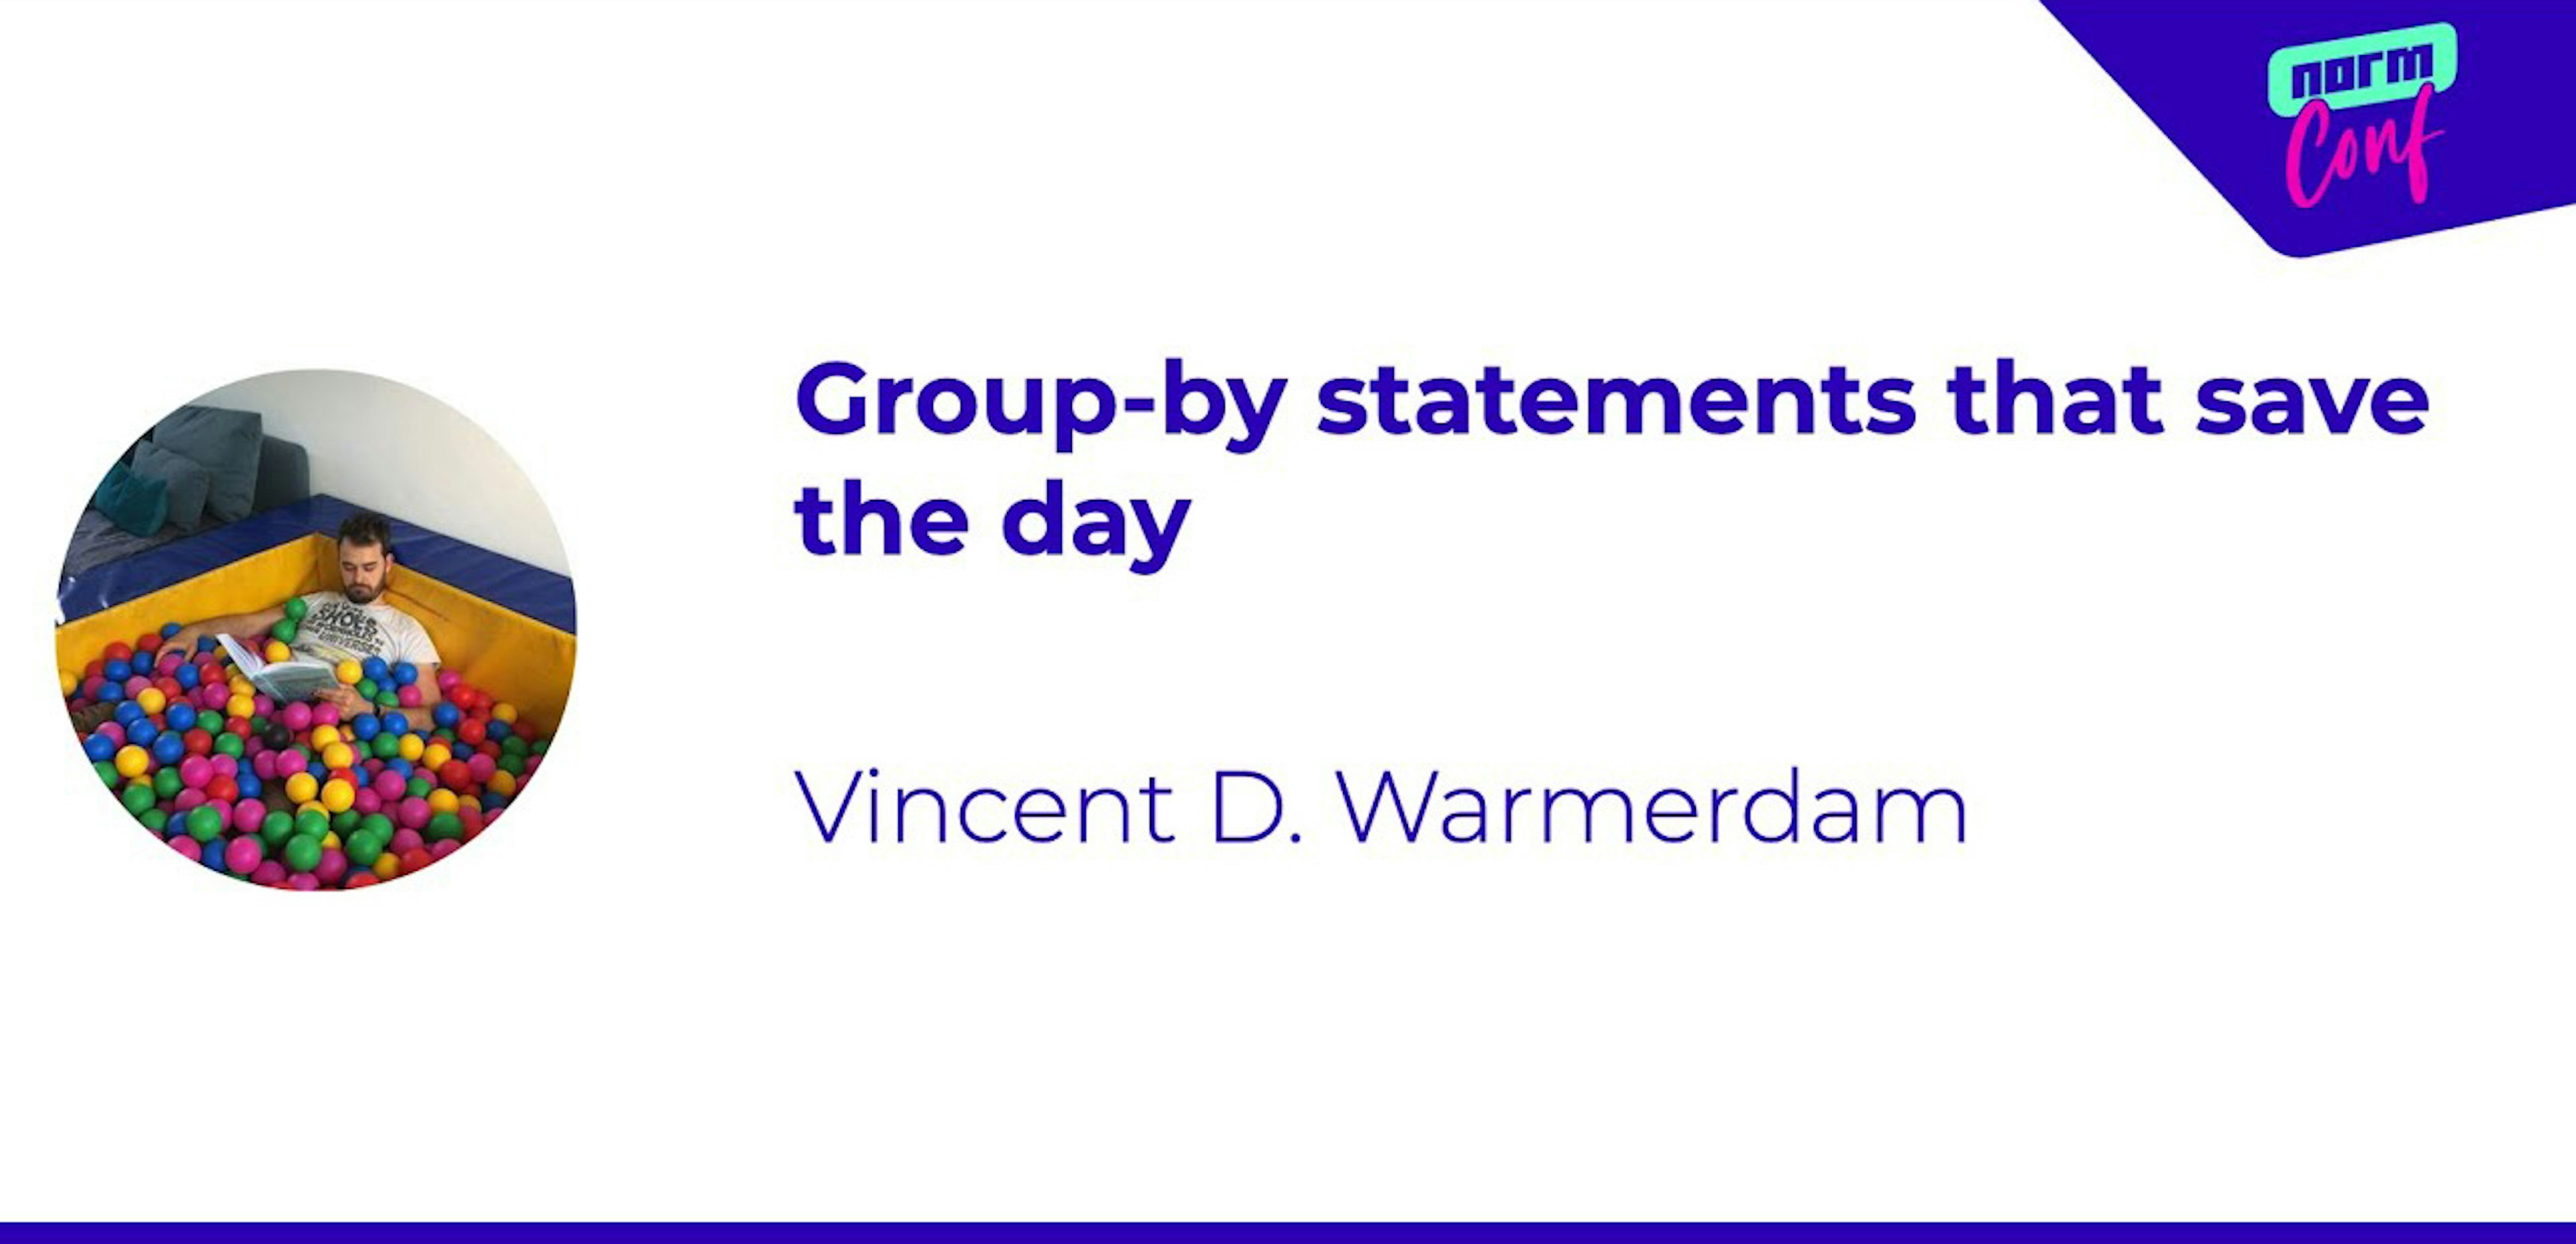 Group-by statements that save the day